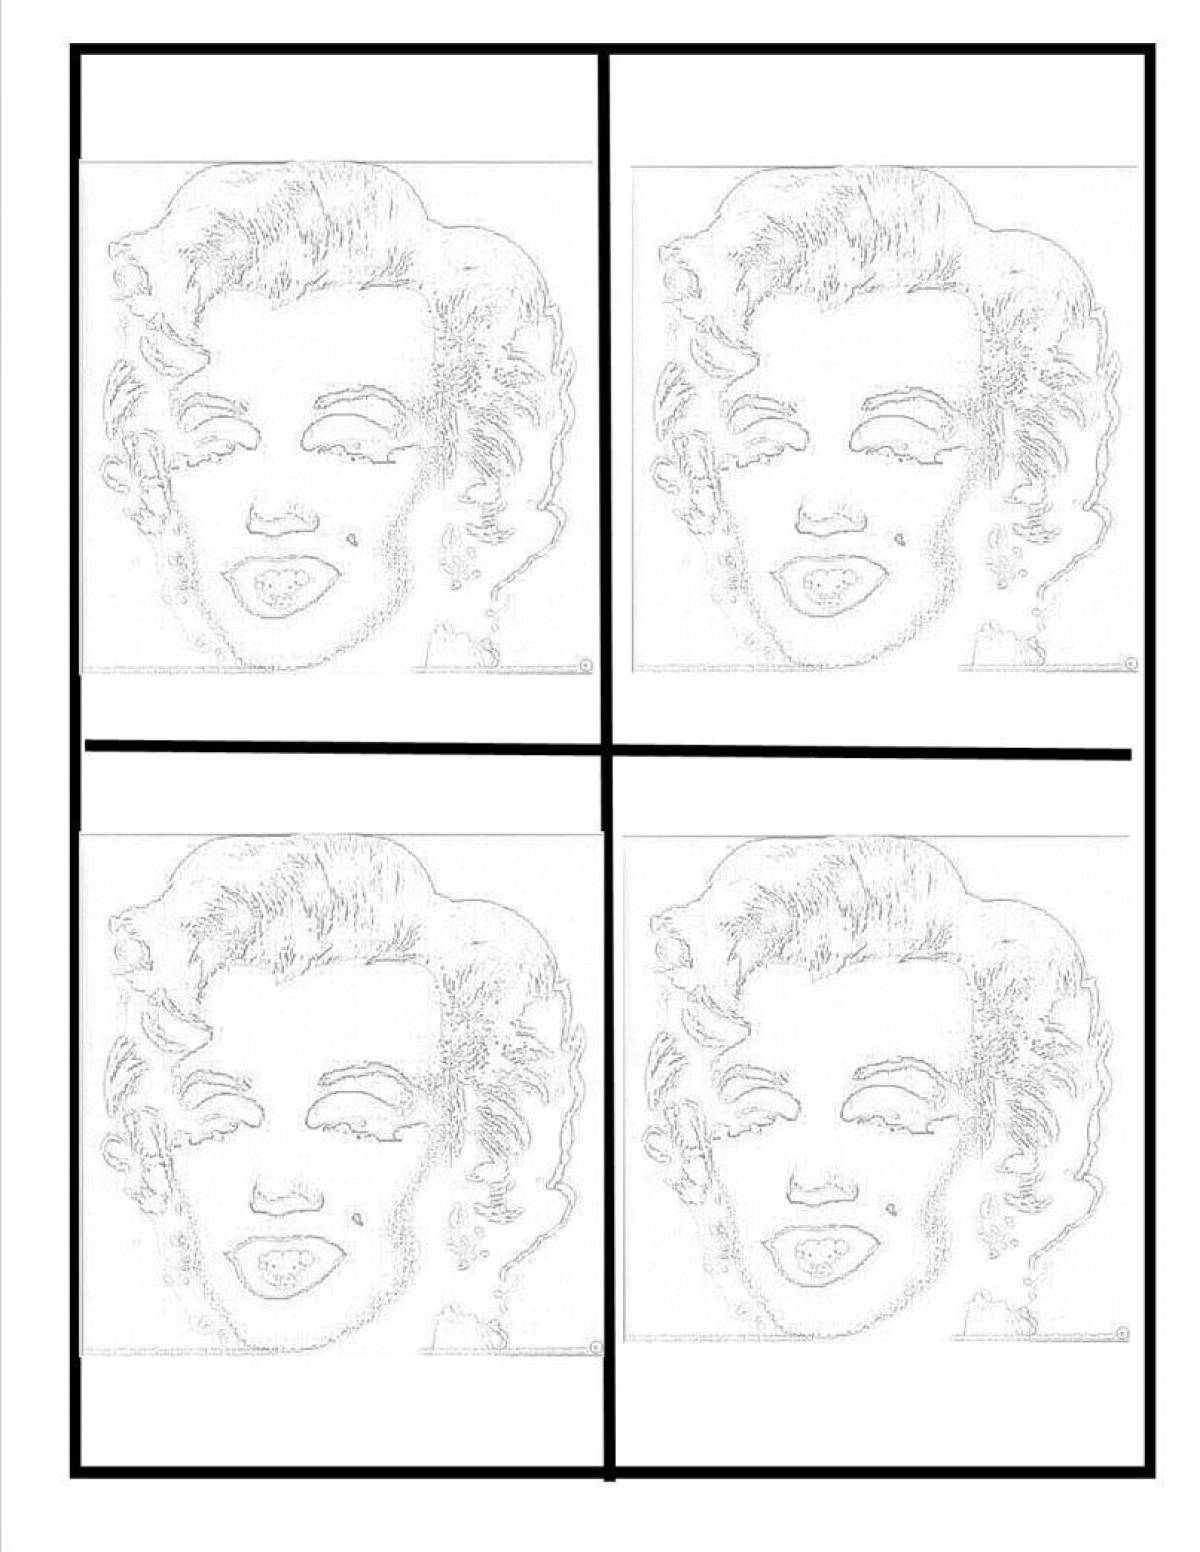 Animated marilyn monroe coloring page